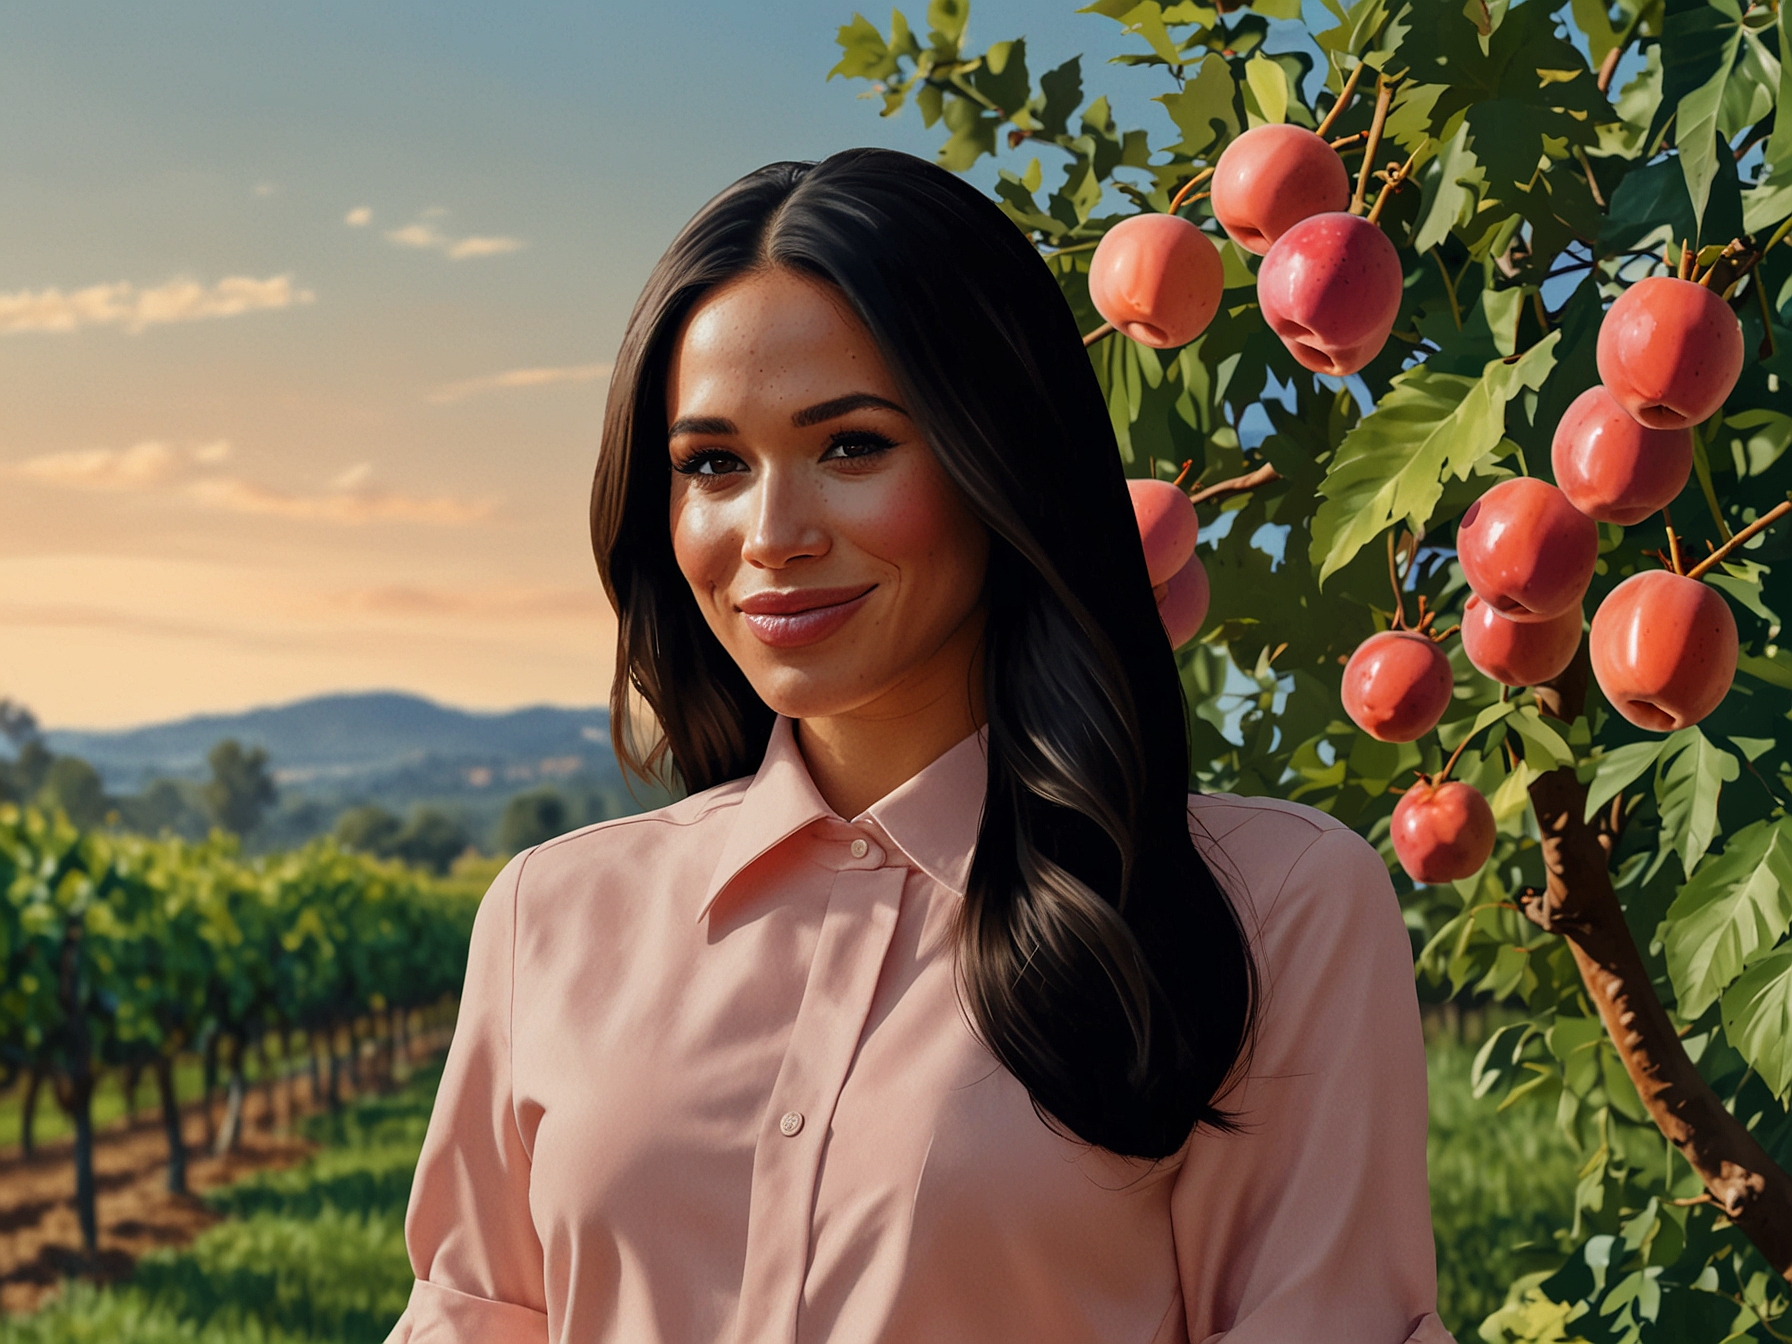 An elegant bottle of rosé wine branded under American Riviera Orchard with a sophisticated design, reflecting Meghan Markle's entry into the wine industry.